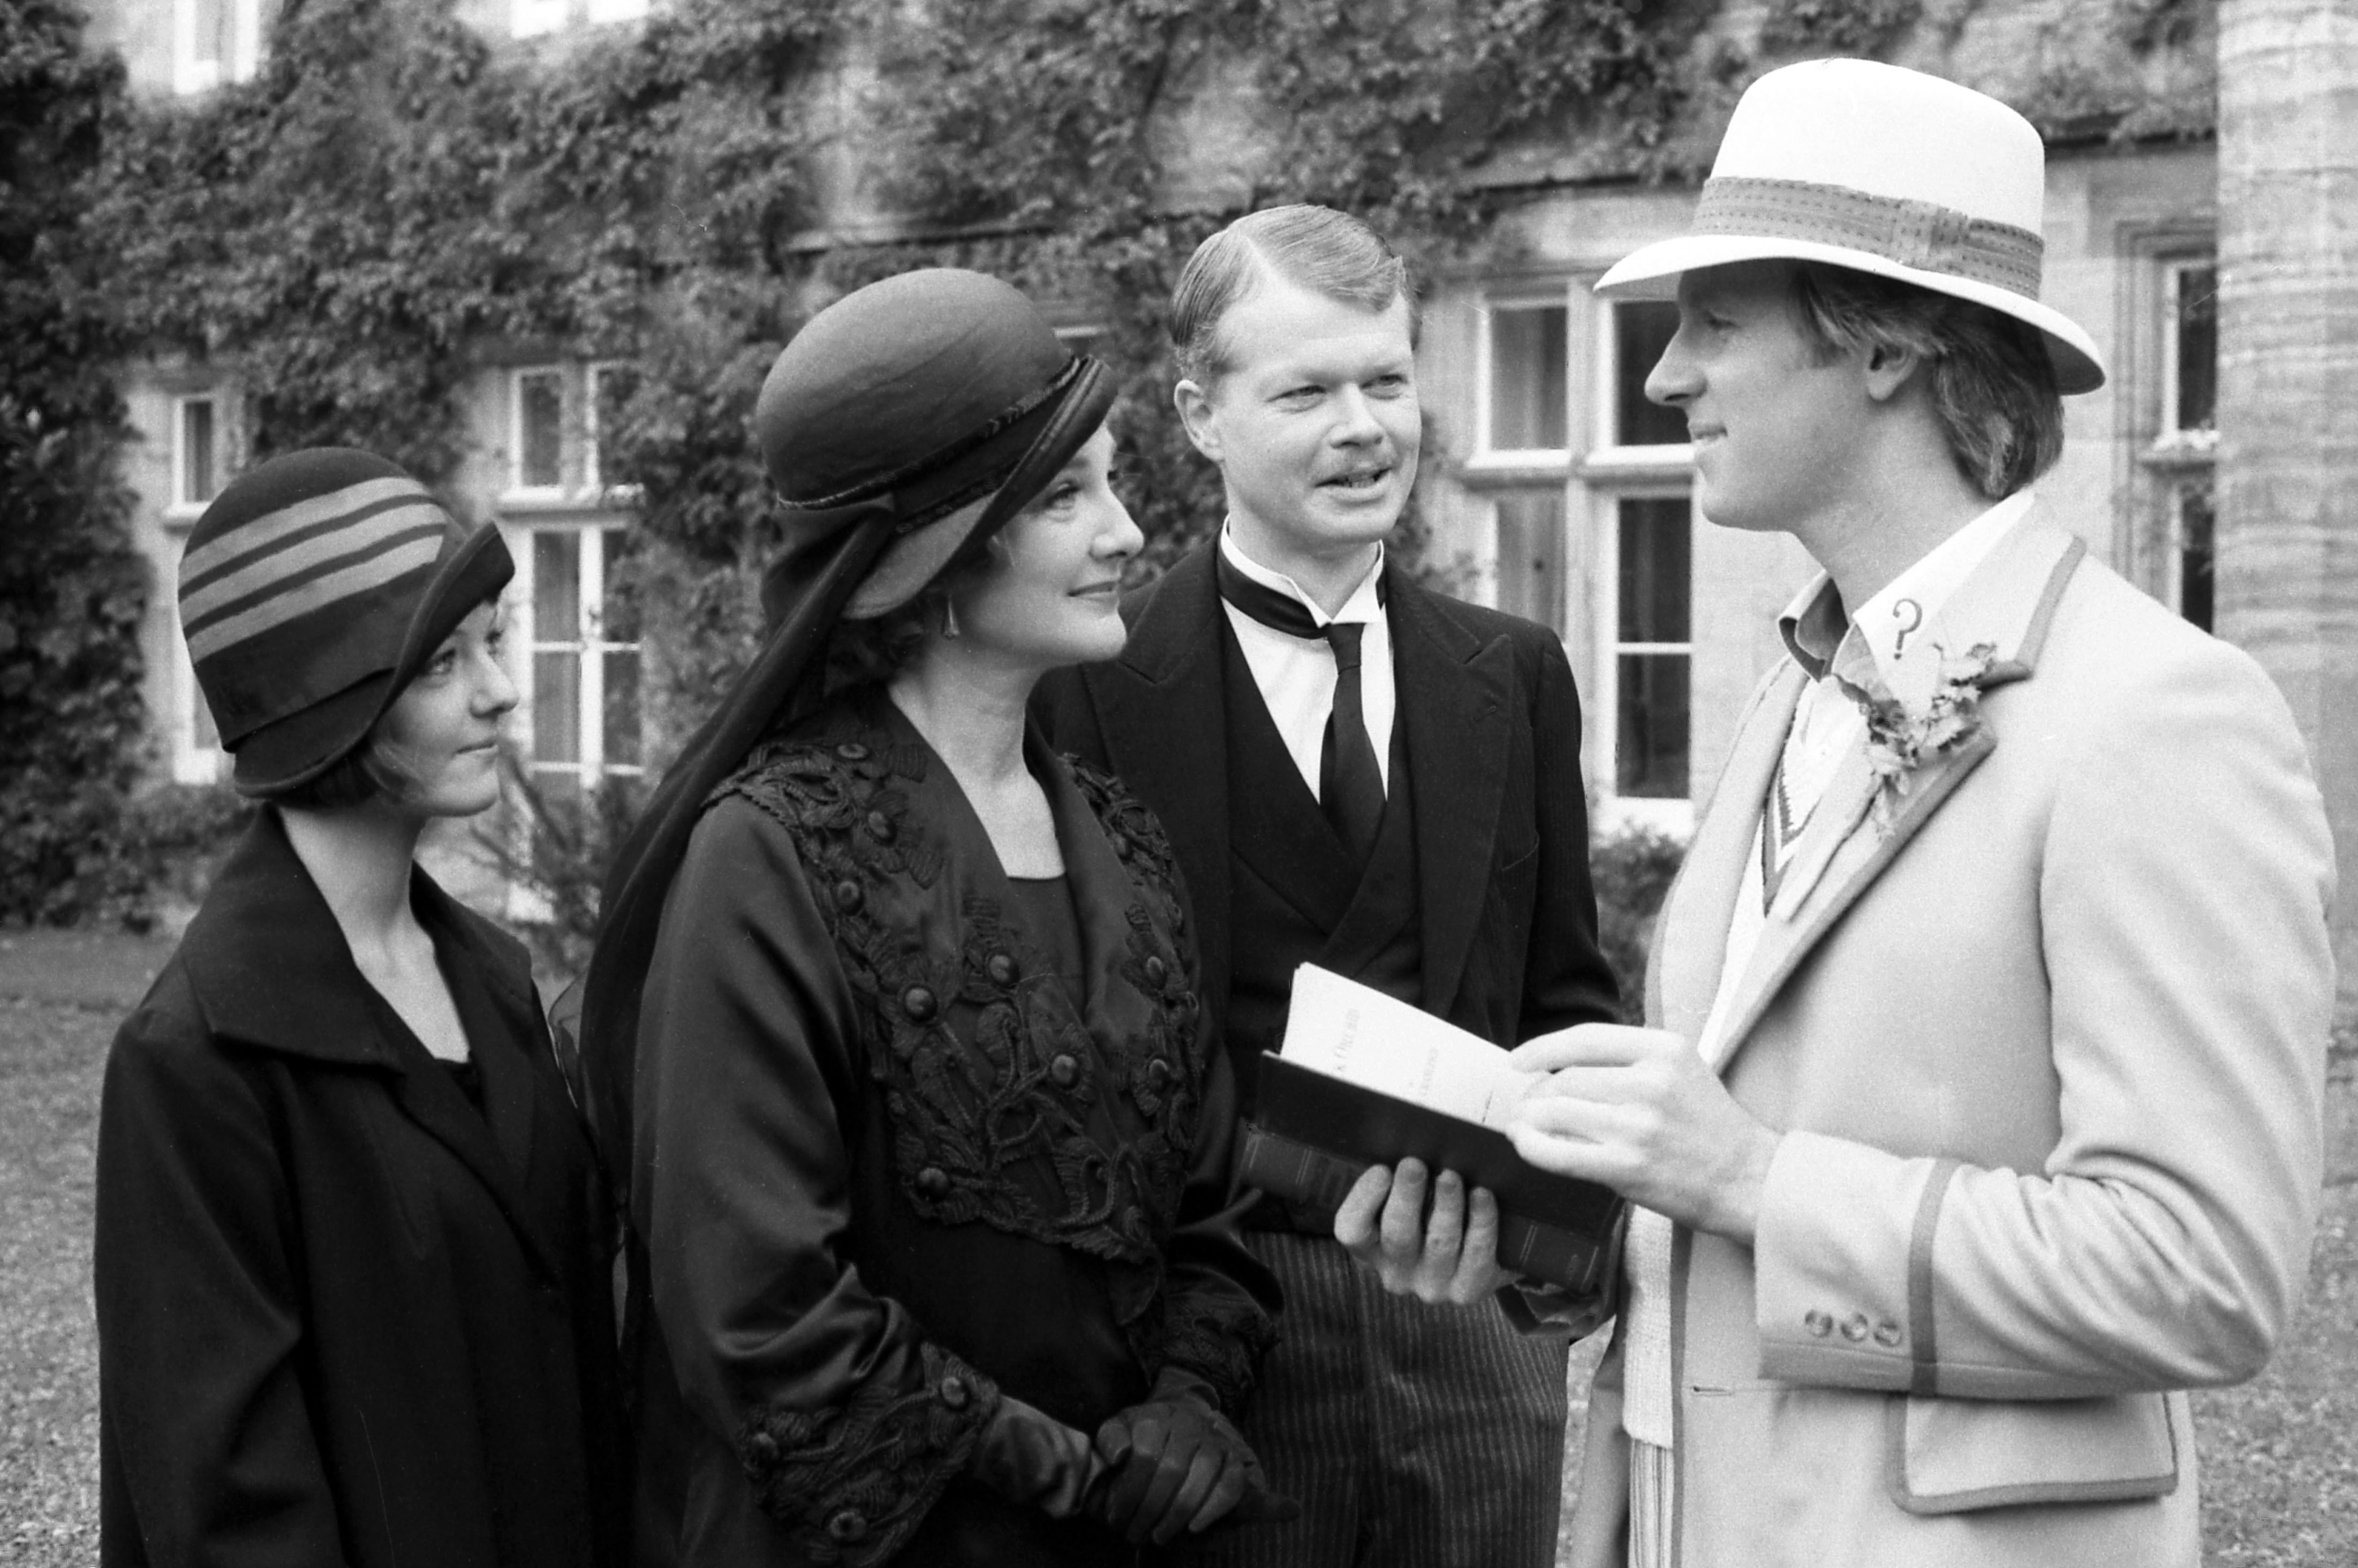 sarah sutton as ann, barbara murray as lady cranleigh, michael cochraine as lord cranleigh and peter davison as the doctor in the two-part adventure black orchid.